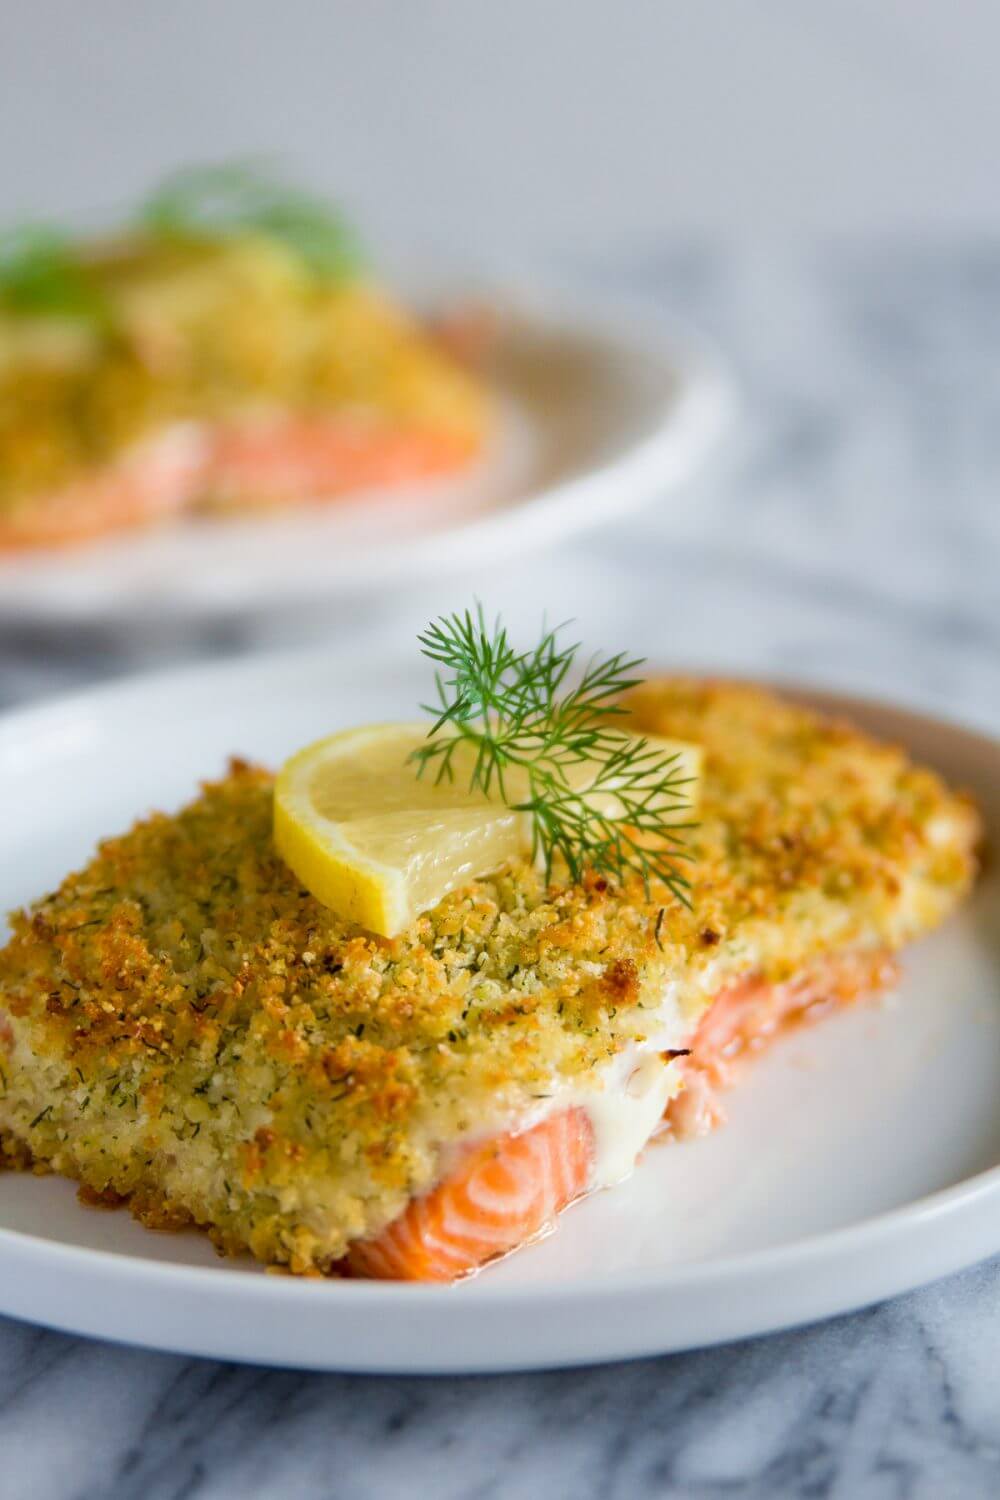 48 Easy Healthy Salmon Recipes To Try Now - SHARP ASPIRANT